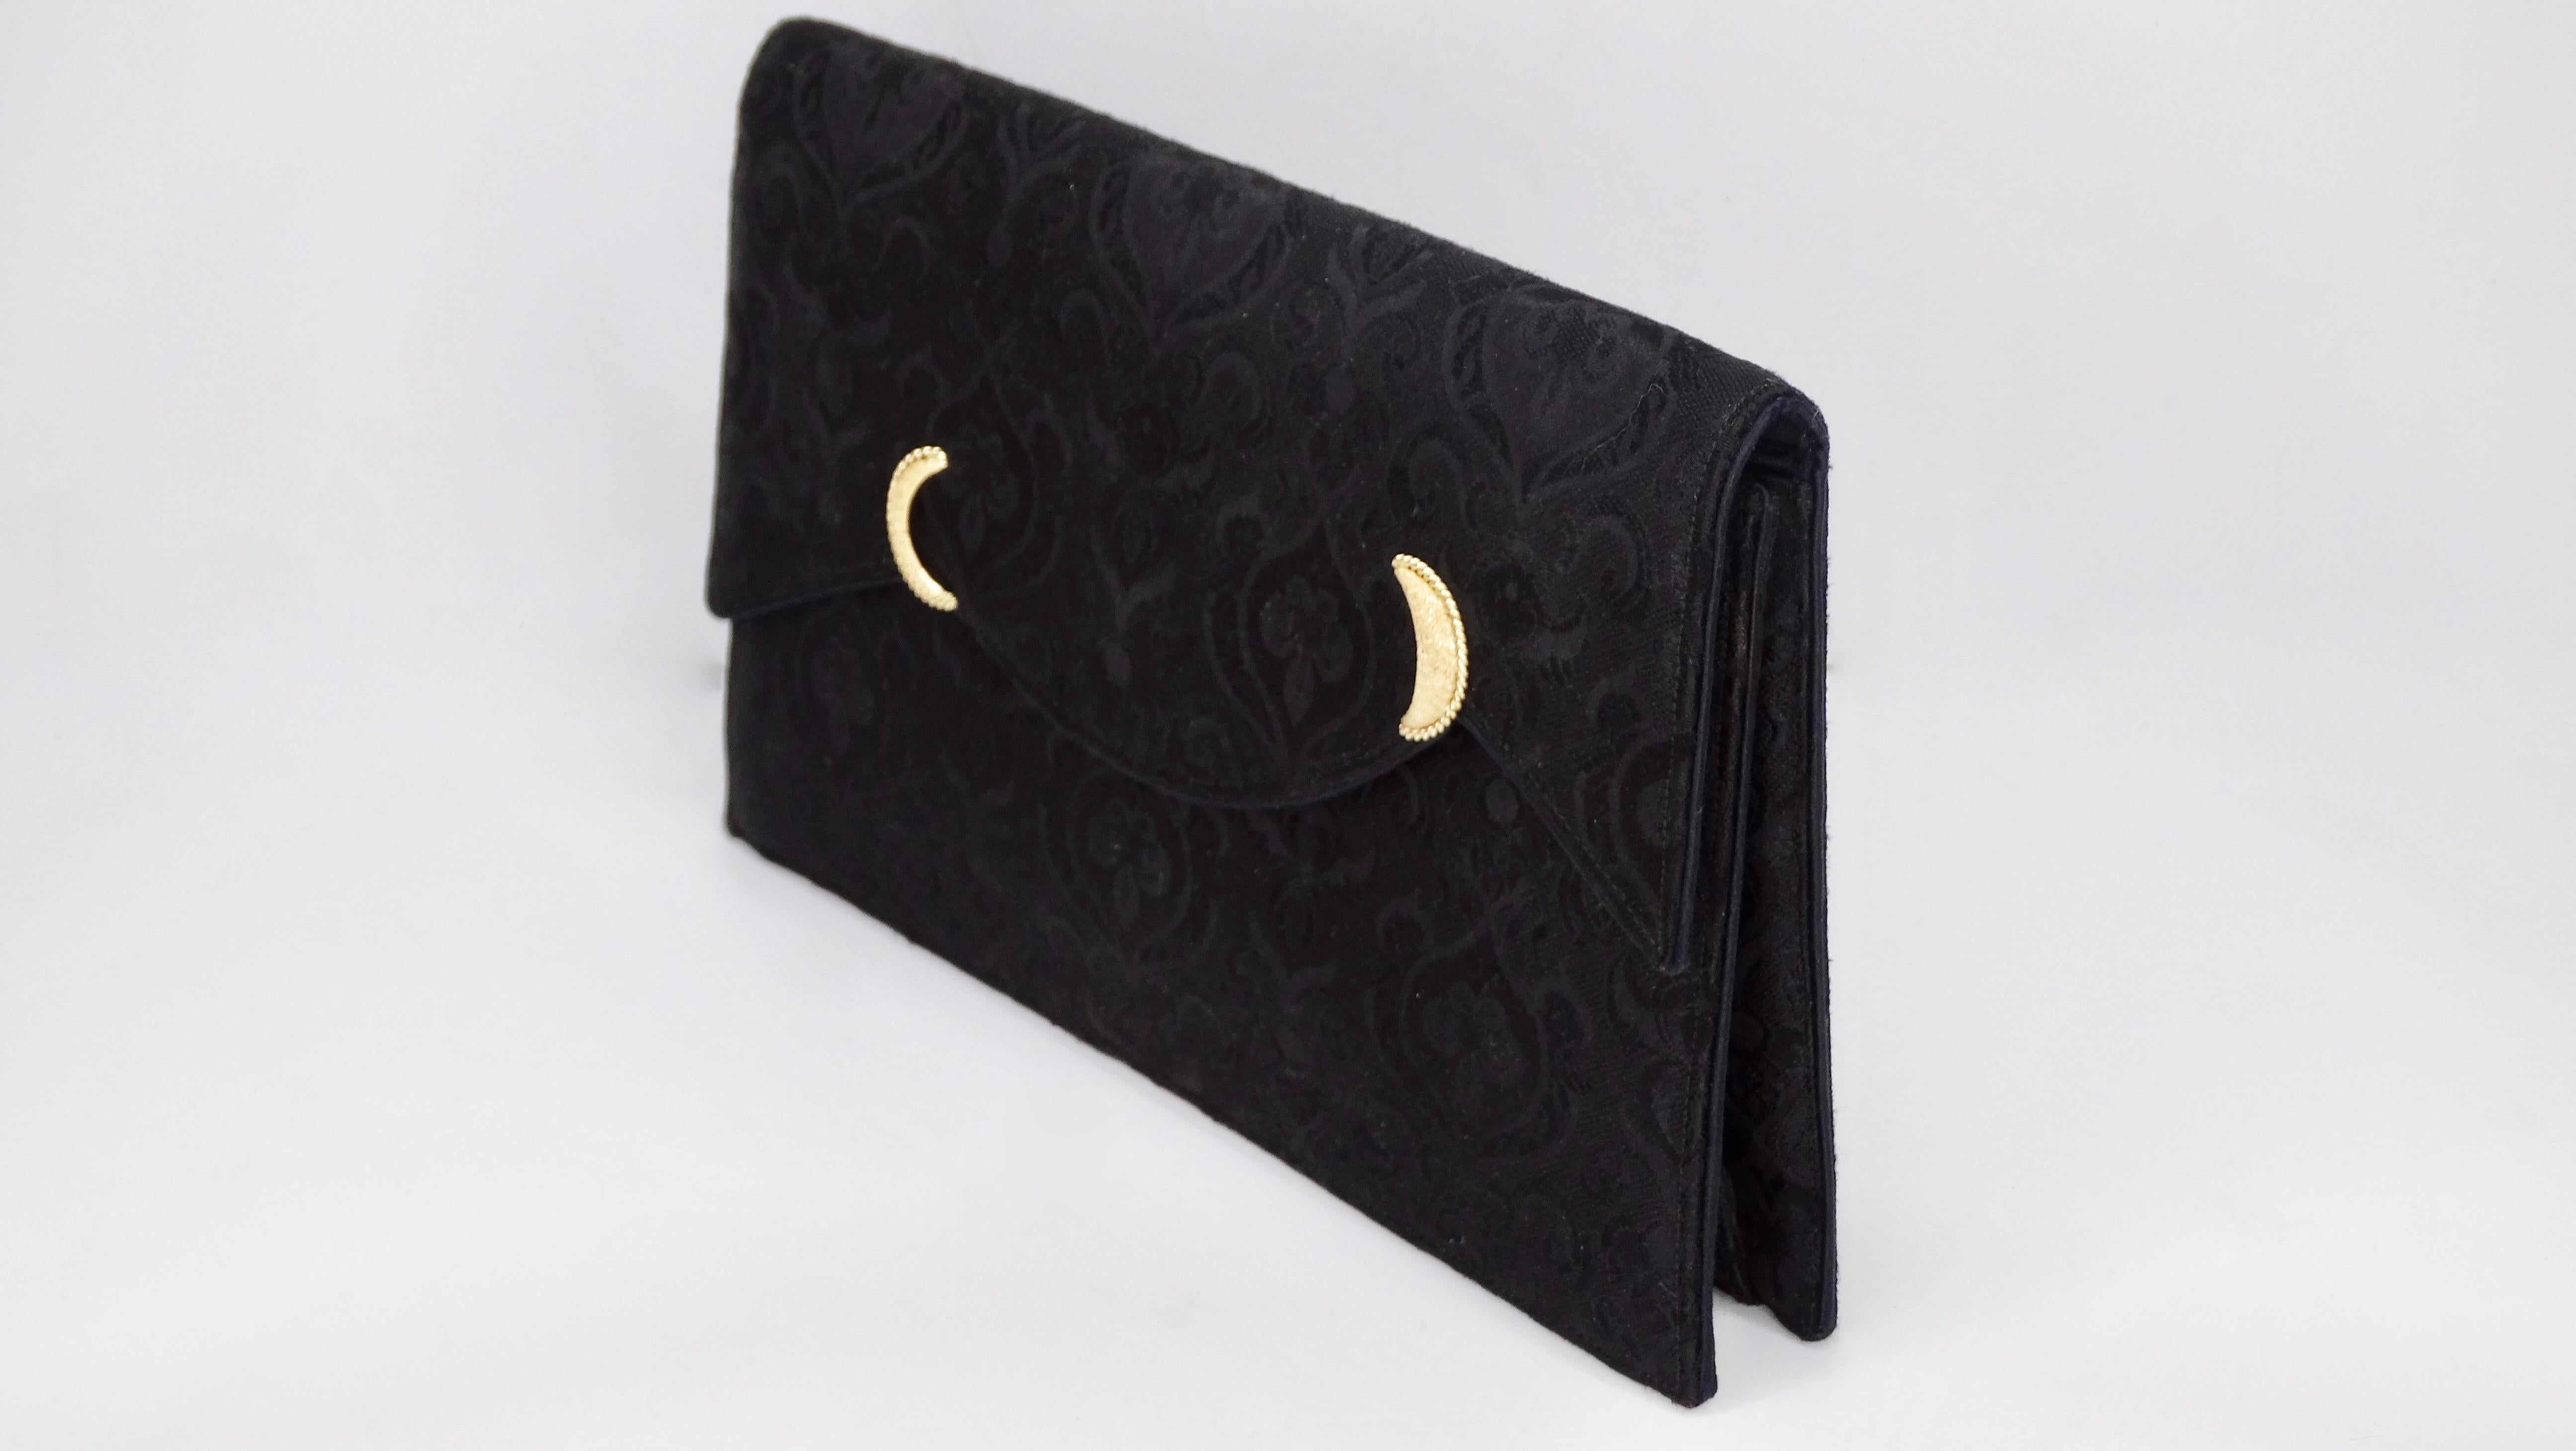 Add some elegance to your look with this amazing Cartier evening clutch! Circa 1960s, this clutch features a vintage fleur de lis pattern with an asymmetrical front flap decorated with two crescent moon shapes. Snap button closure opens up to a